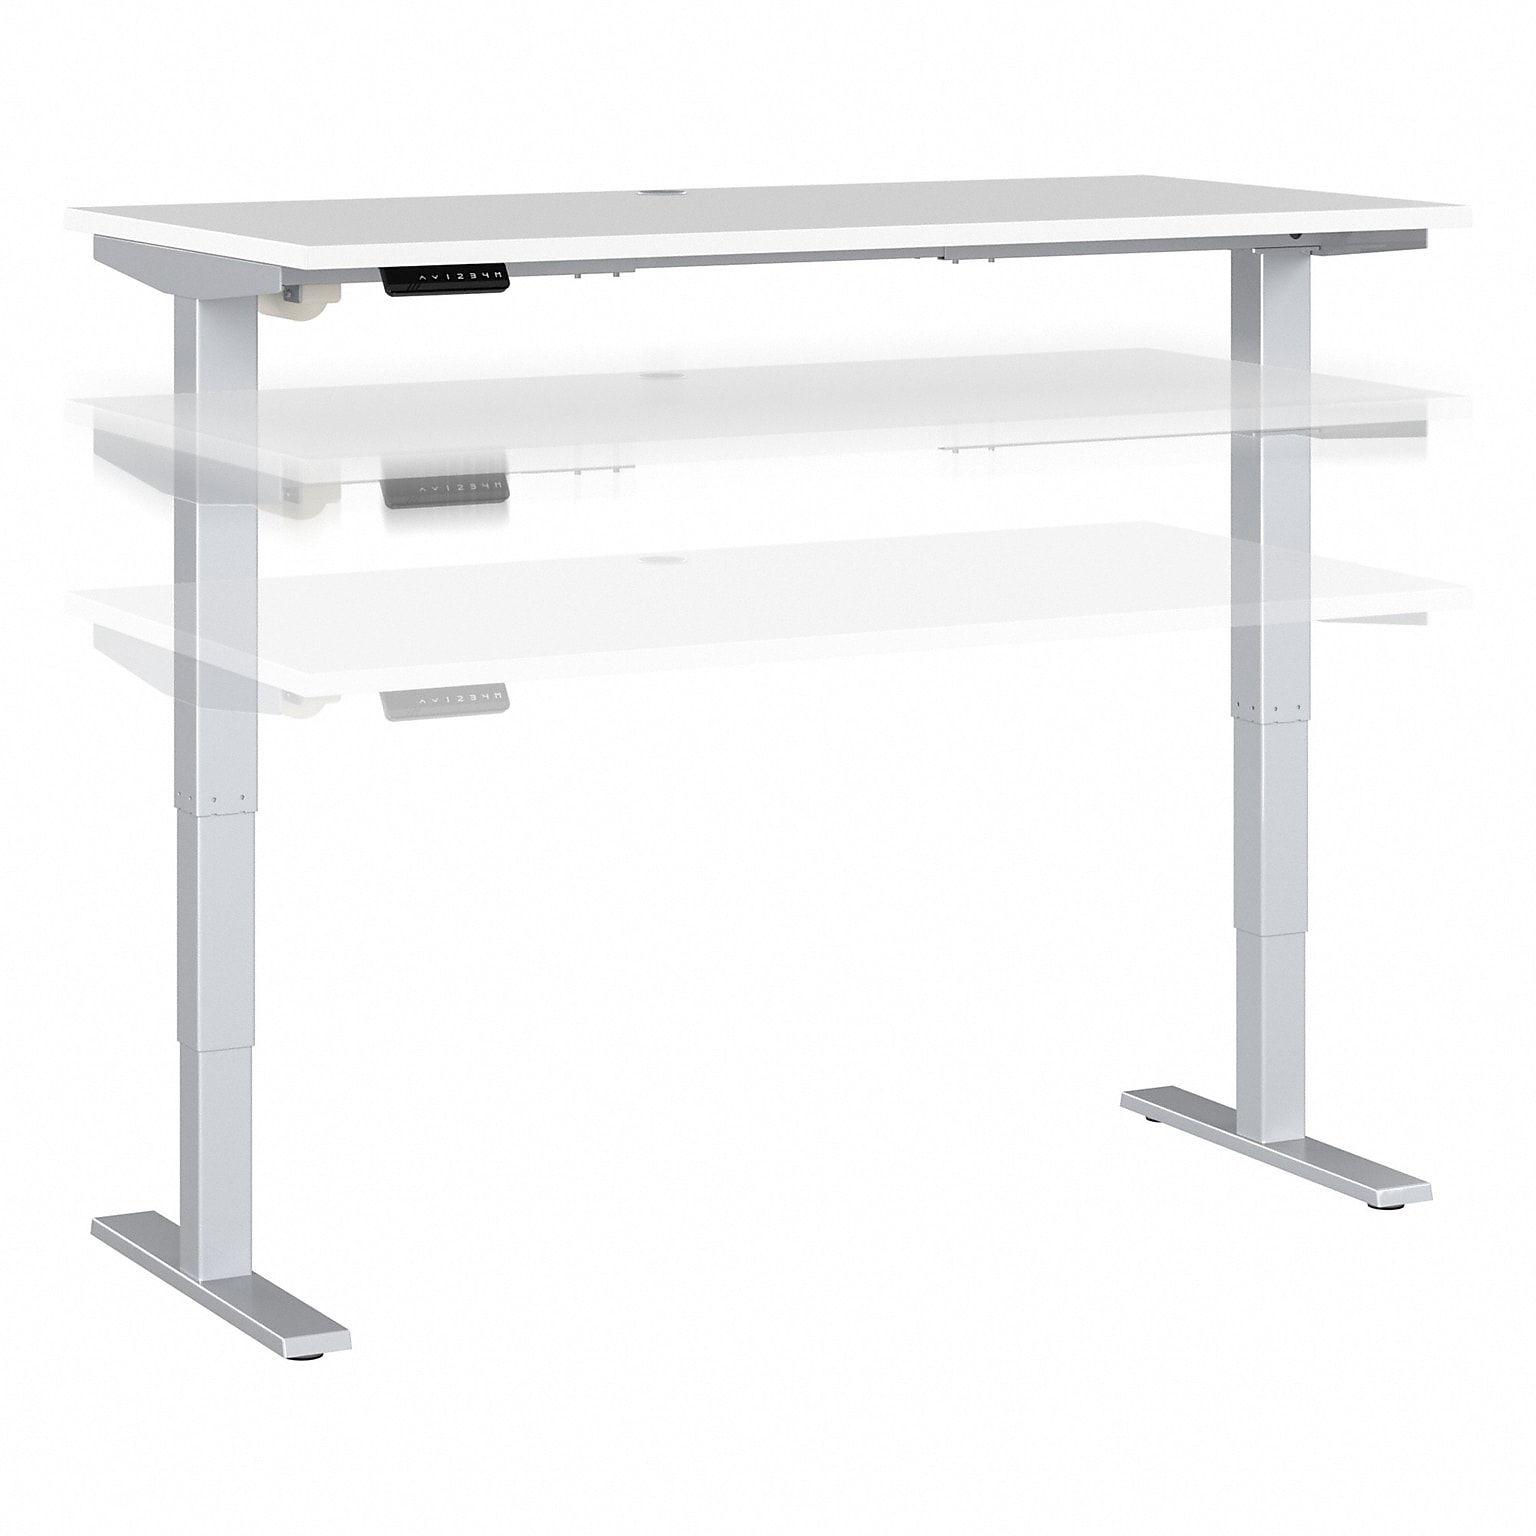 Bush Business Furniture Move 40 Series 60W Electric Height Adjustable Standing Desk, White/Cool Gray Metallic (M4S6030WHSK)